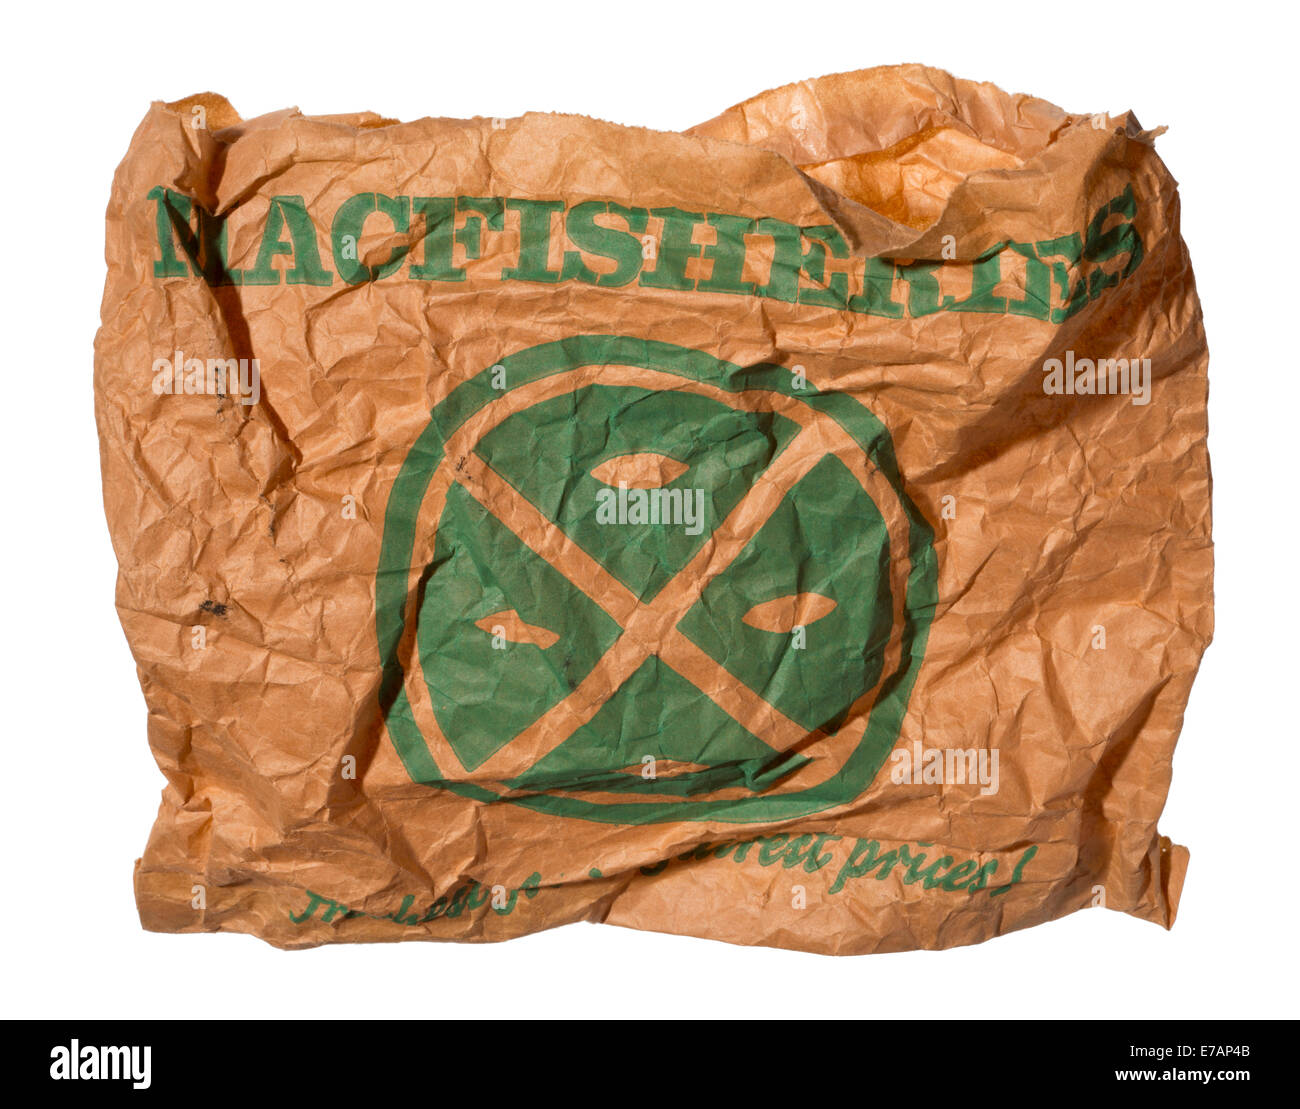 Old fashioned brown paper bag from Macfisheries. British chain of high street fish shops in the 1960's and 1970's. Stock Photo